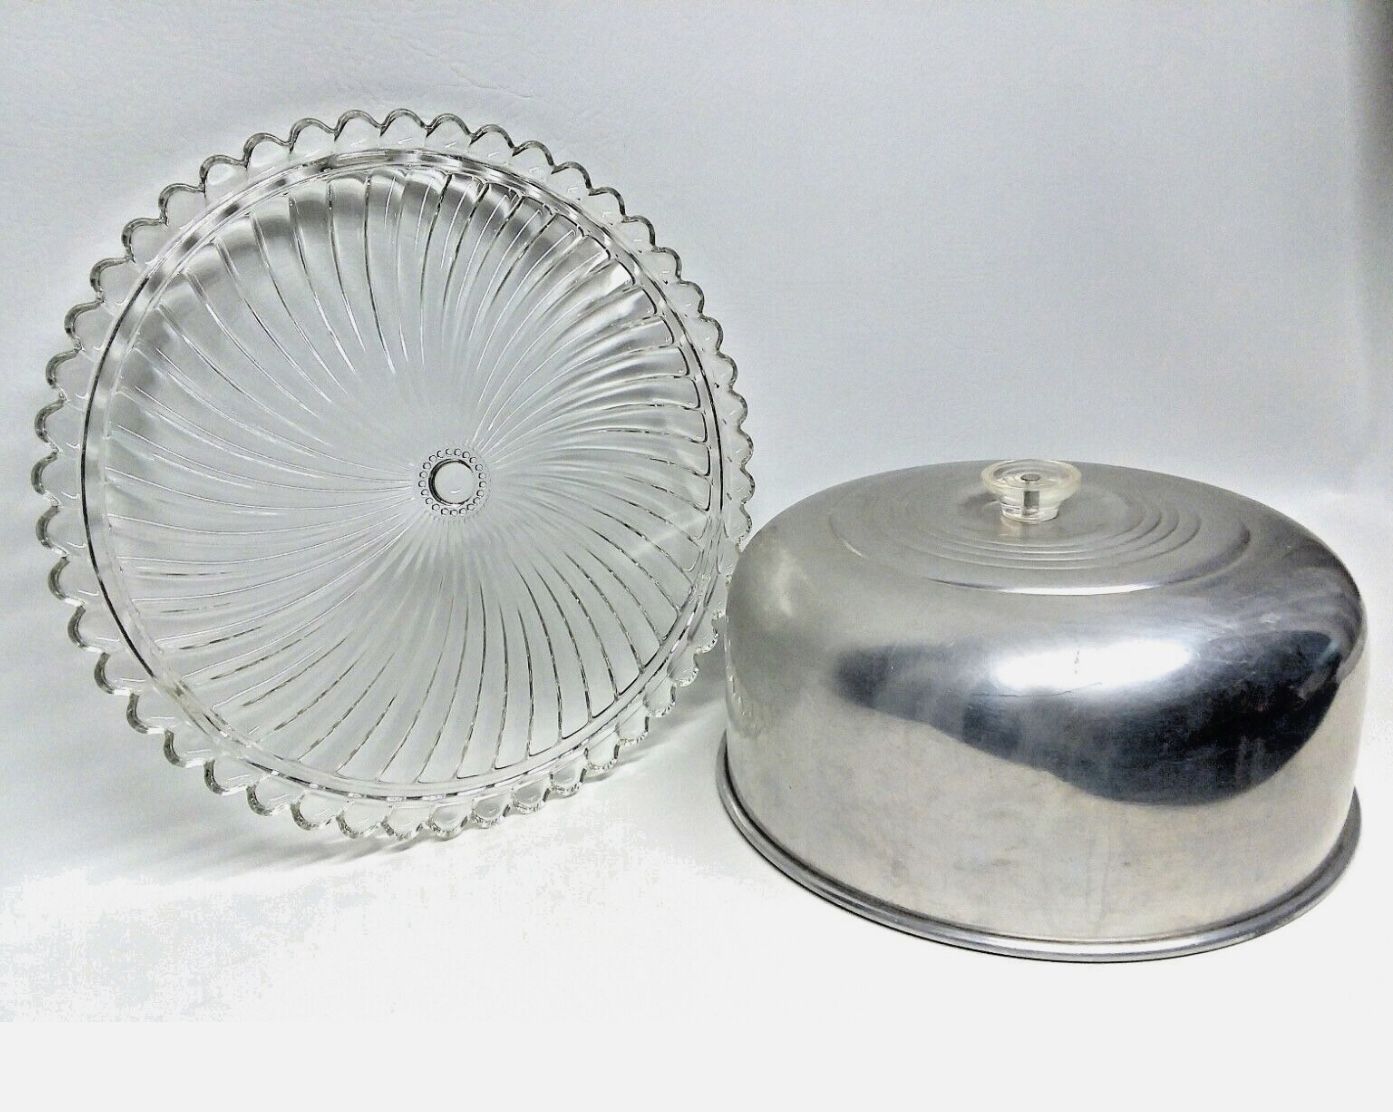 Vintage Decorative Glass Footed Cake Plate with Aluminum Dome Lid 12.5"h x 6.5"w